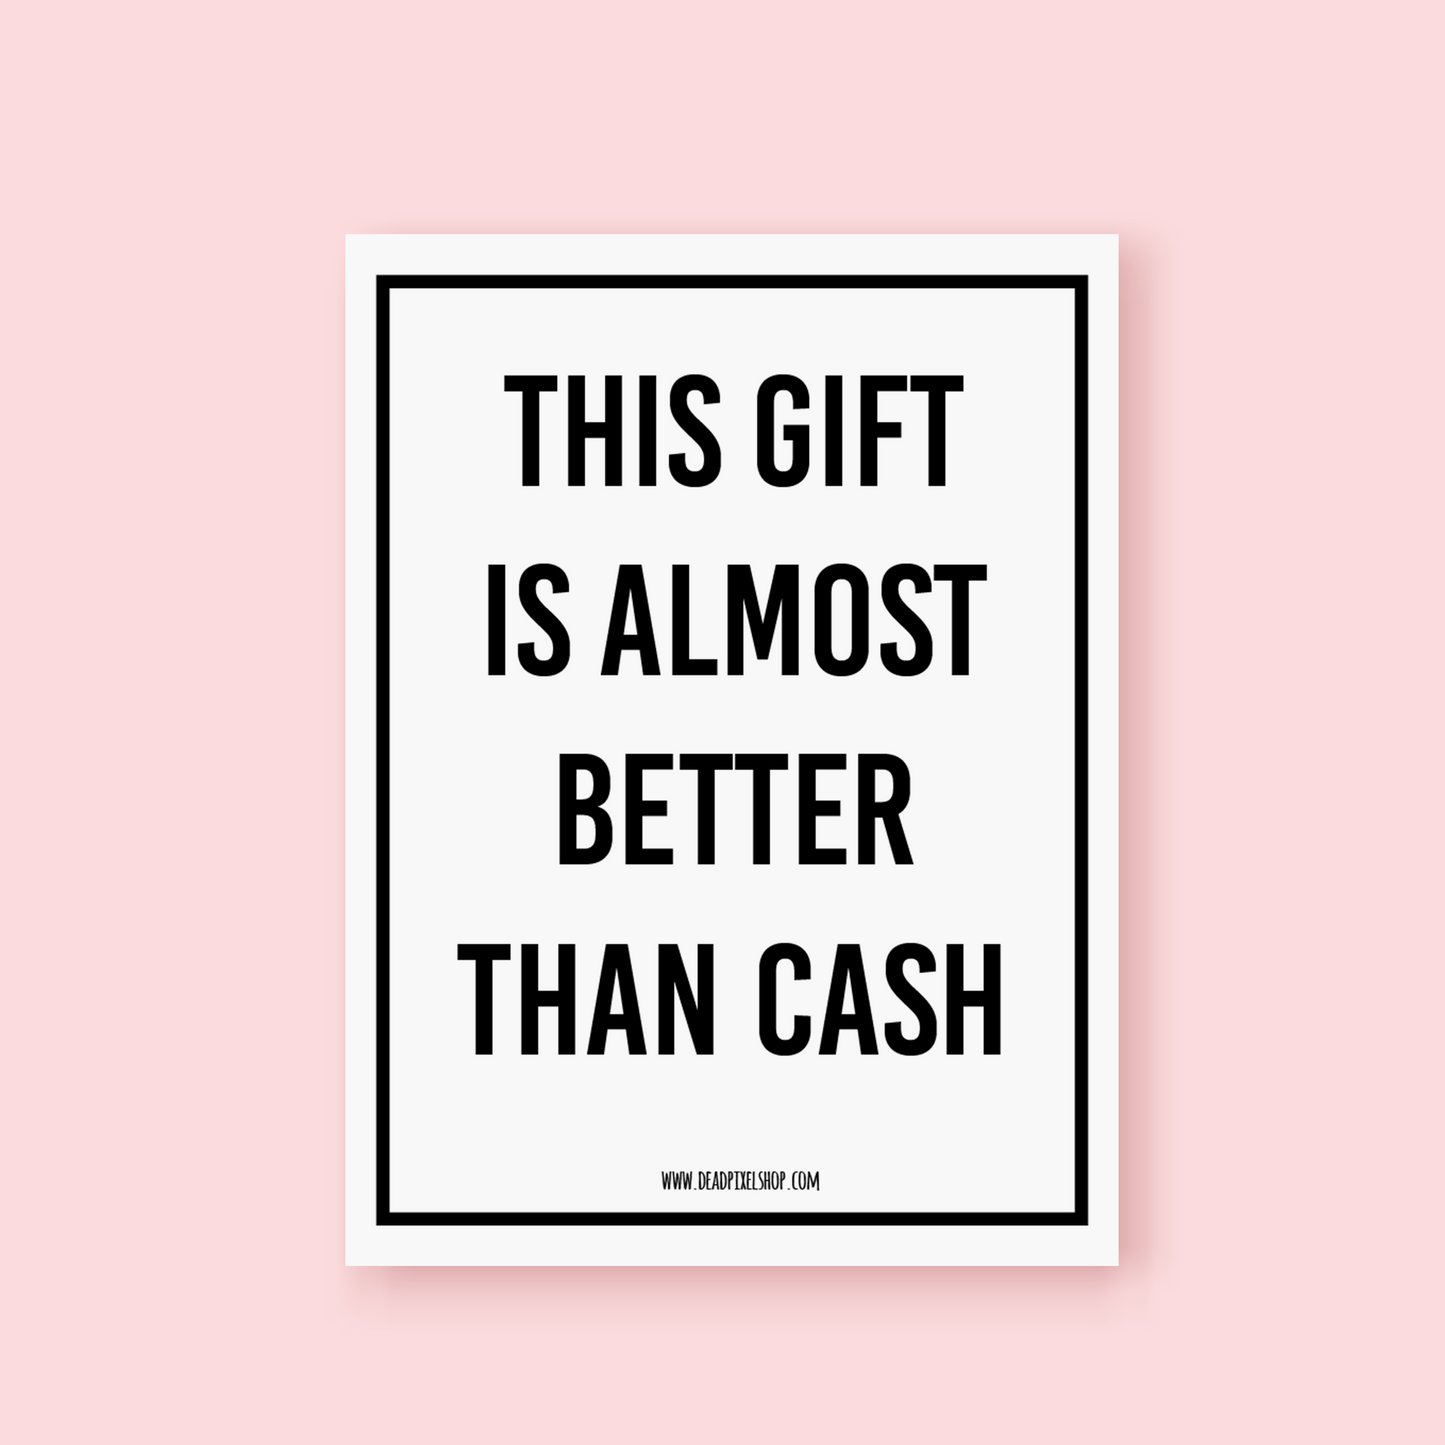 Wijnetiket - This gift is almost better than cash